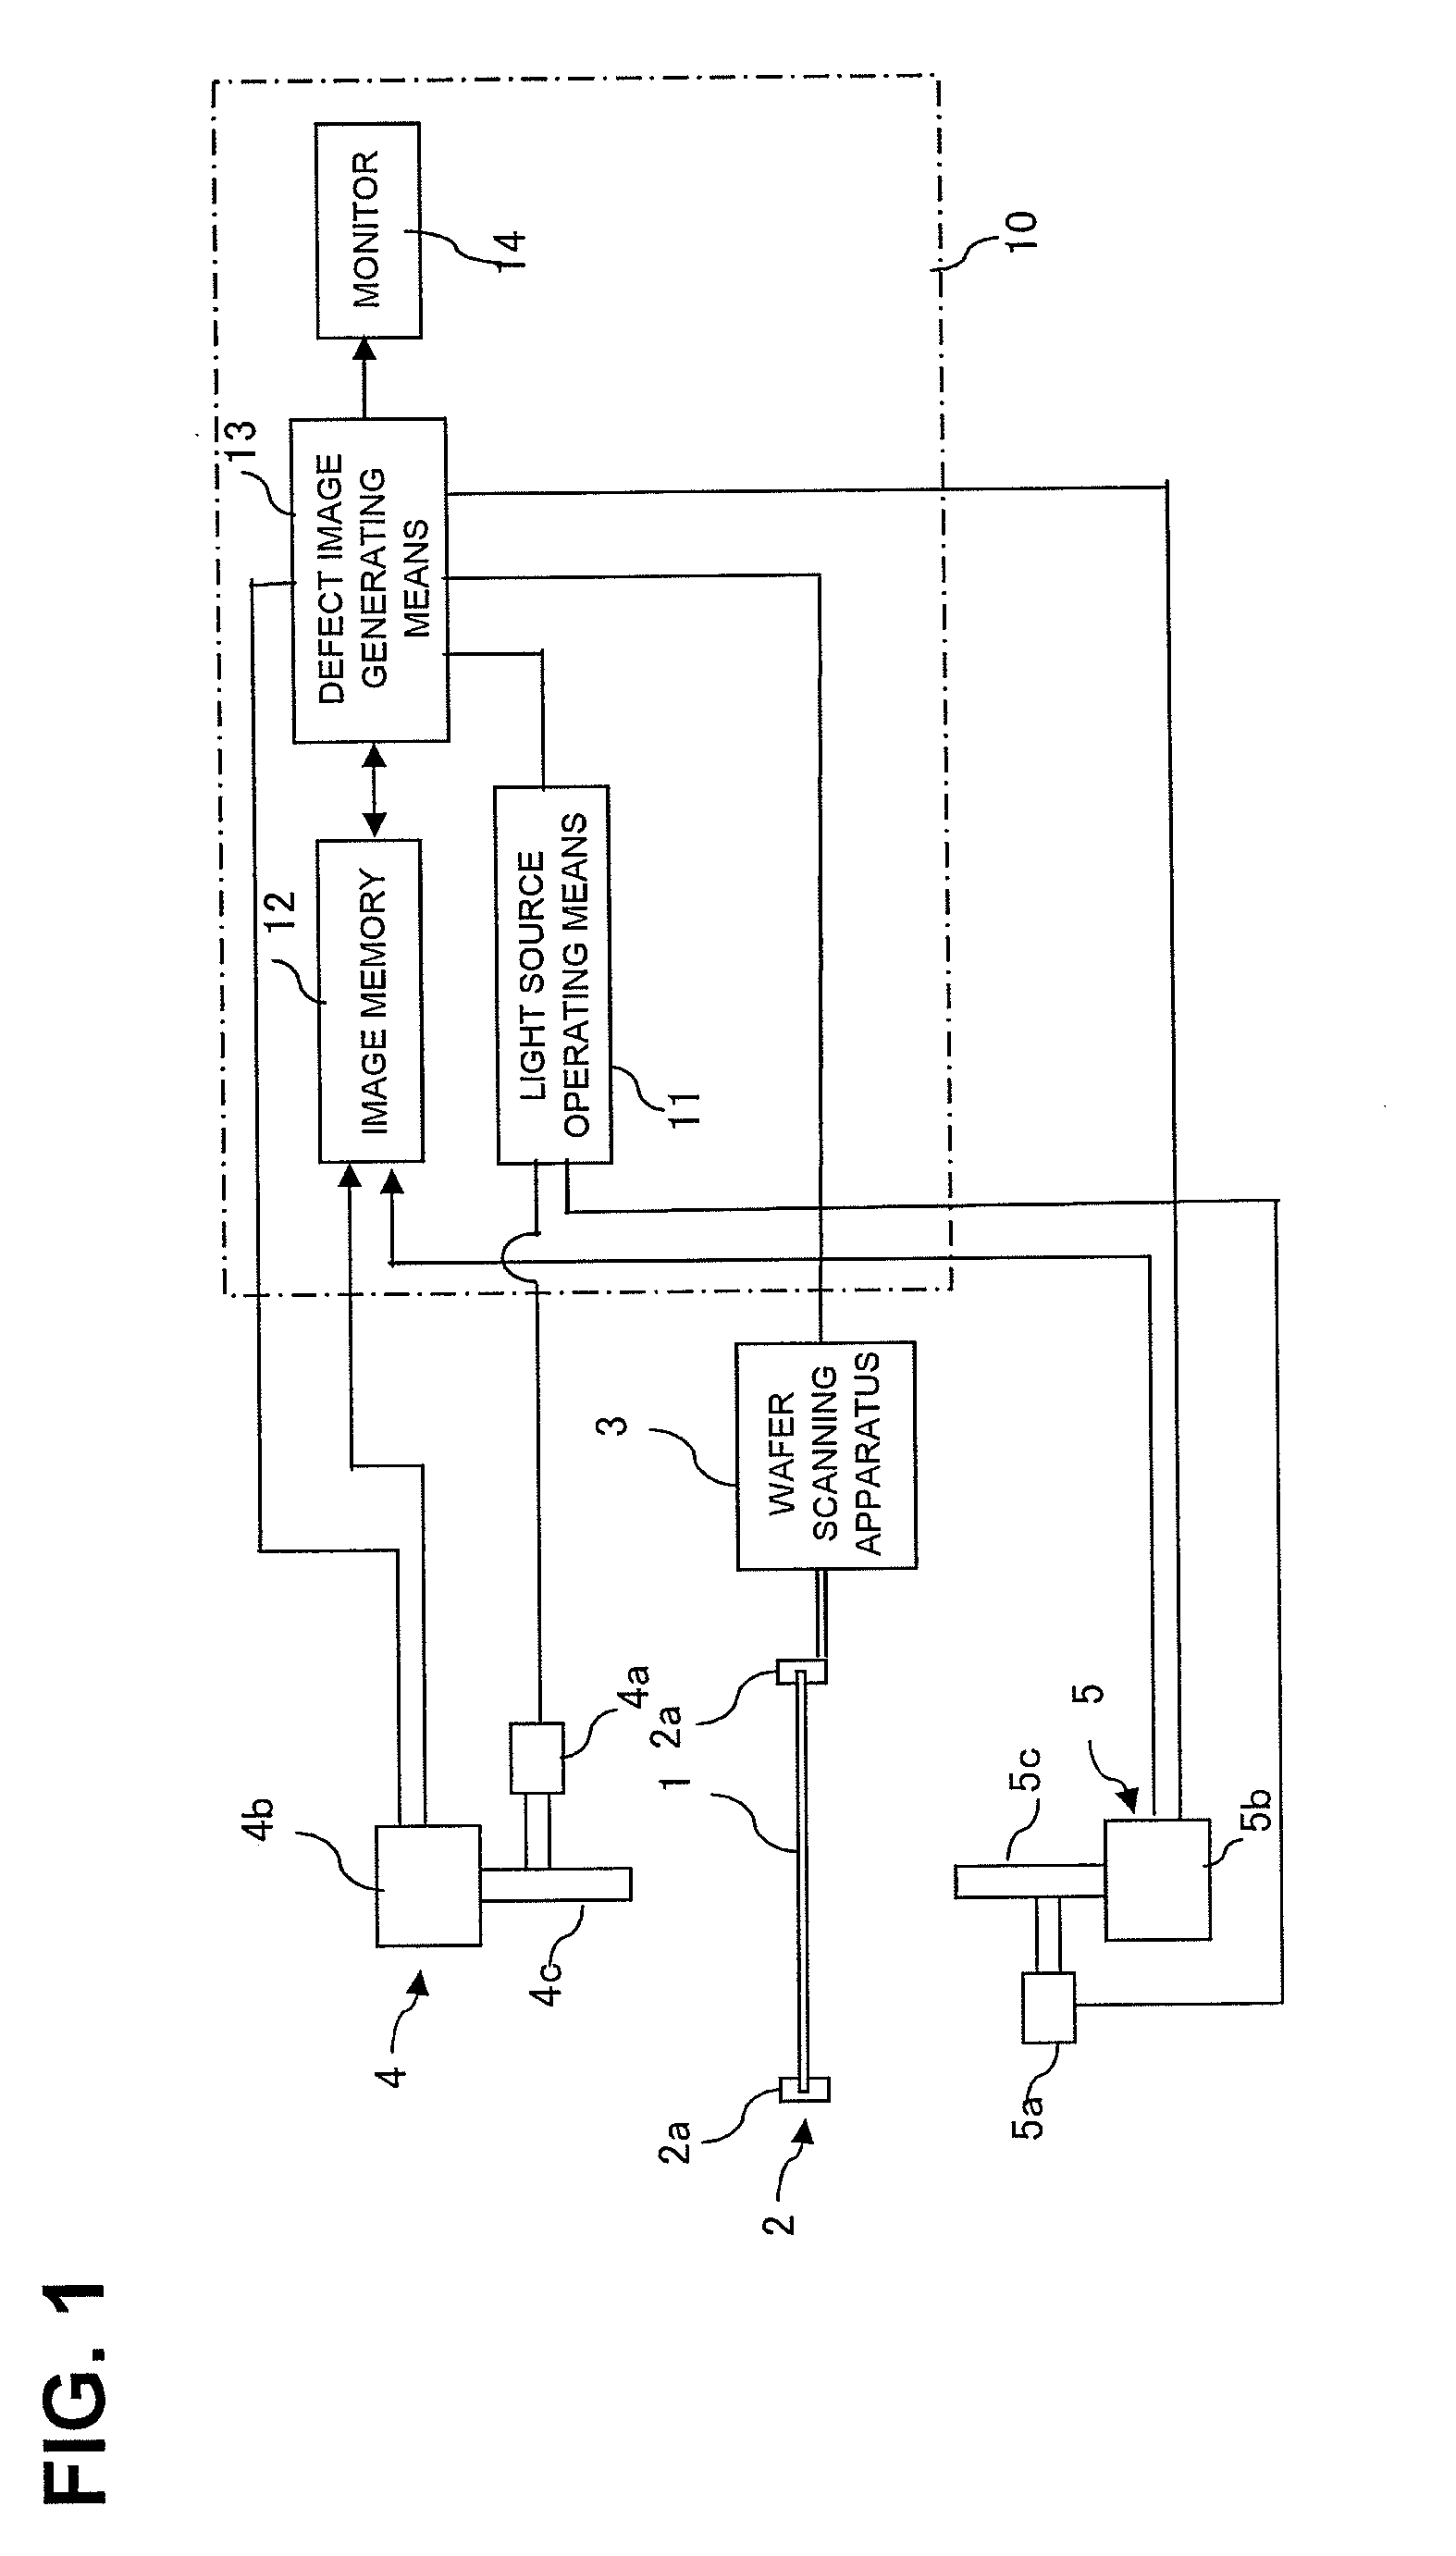 Method and apparatus for inspecting defects in wafer